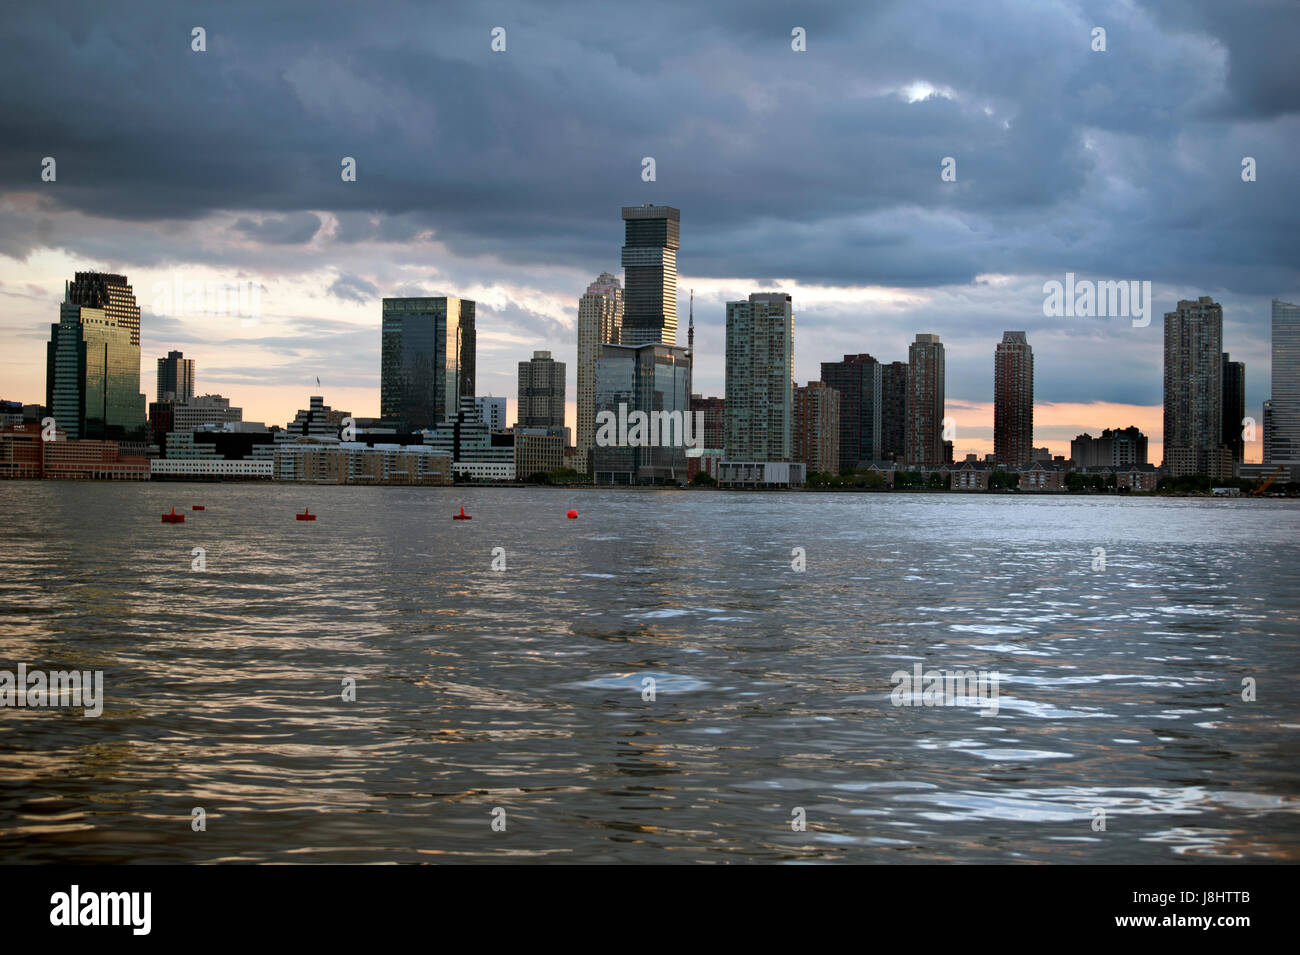 Jersey City as seen at sunset from the New York City side of the Hudson River. May 27, 2017 Stock Photo